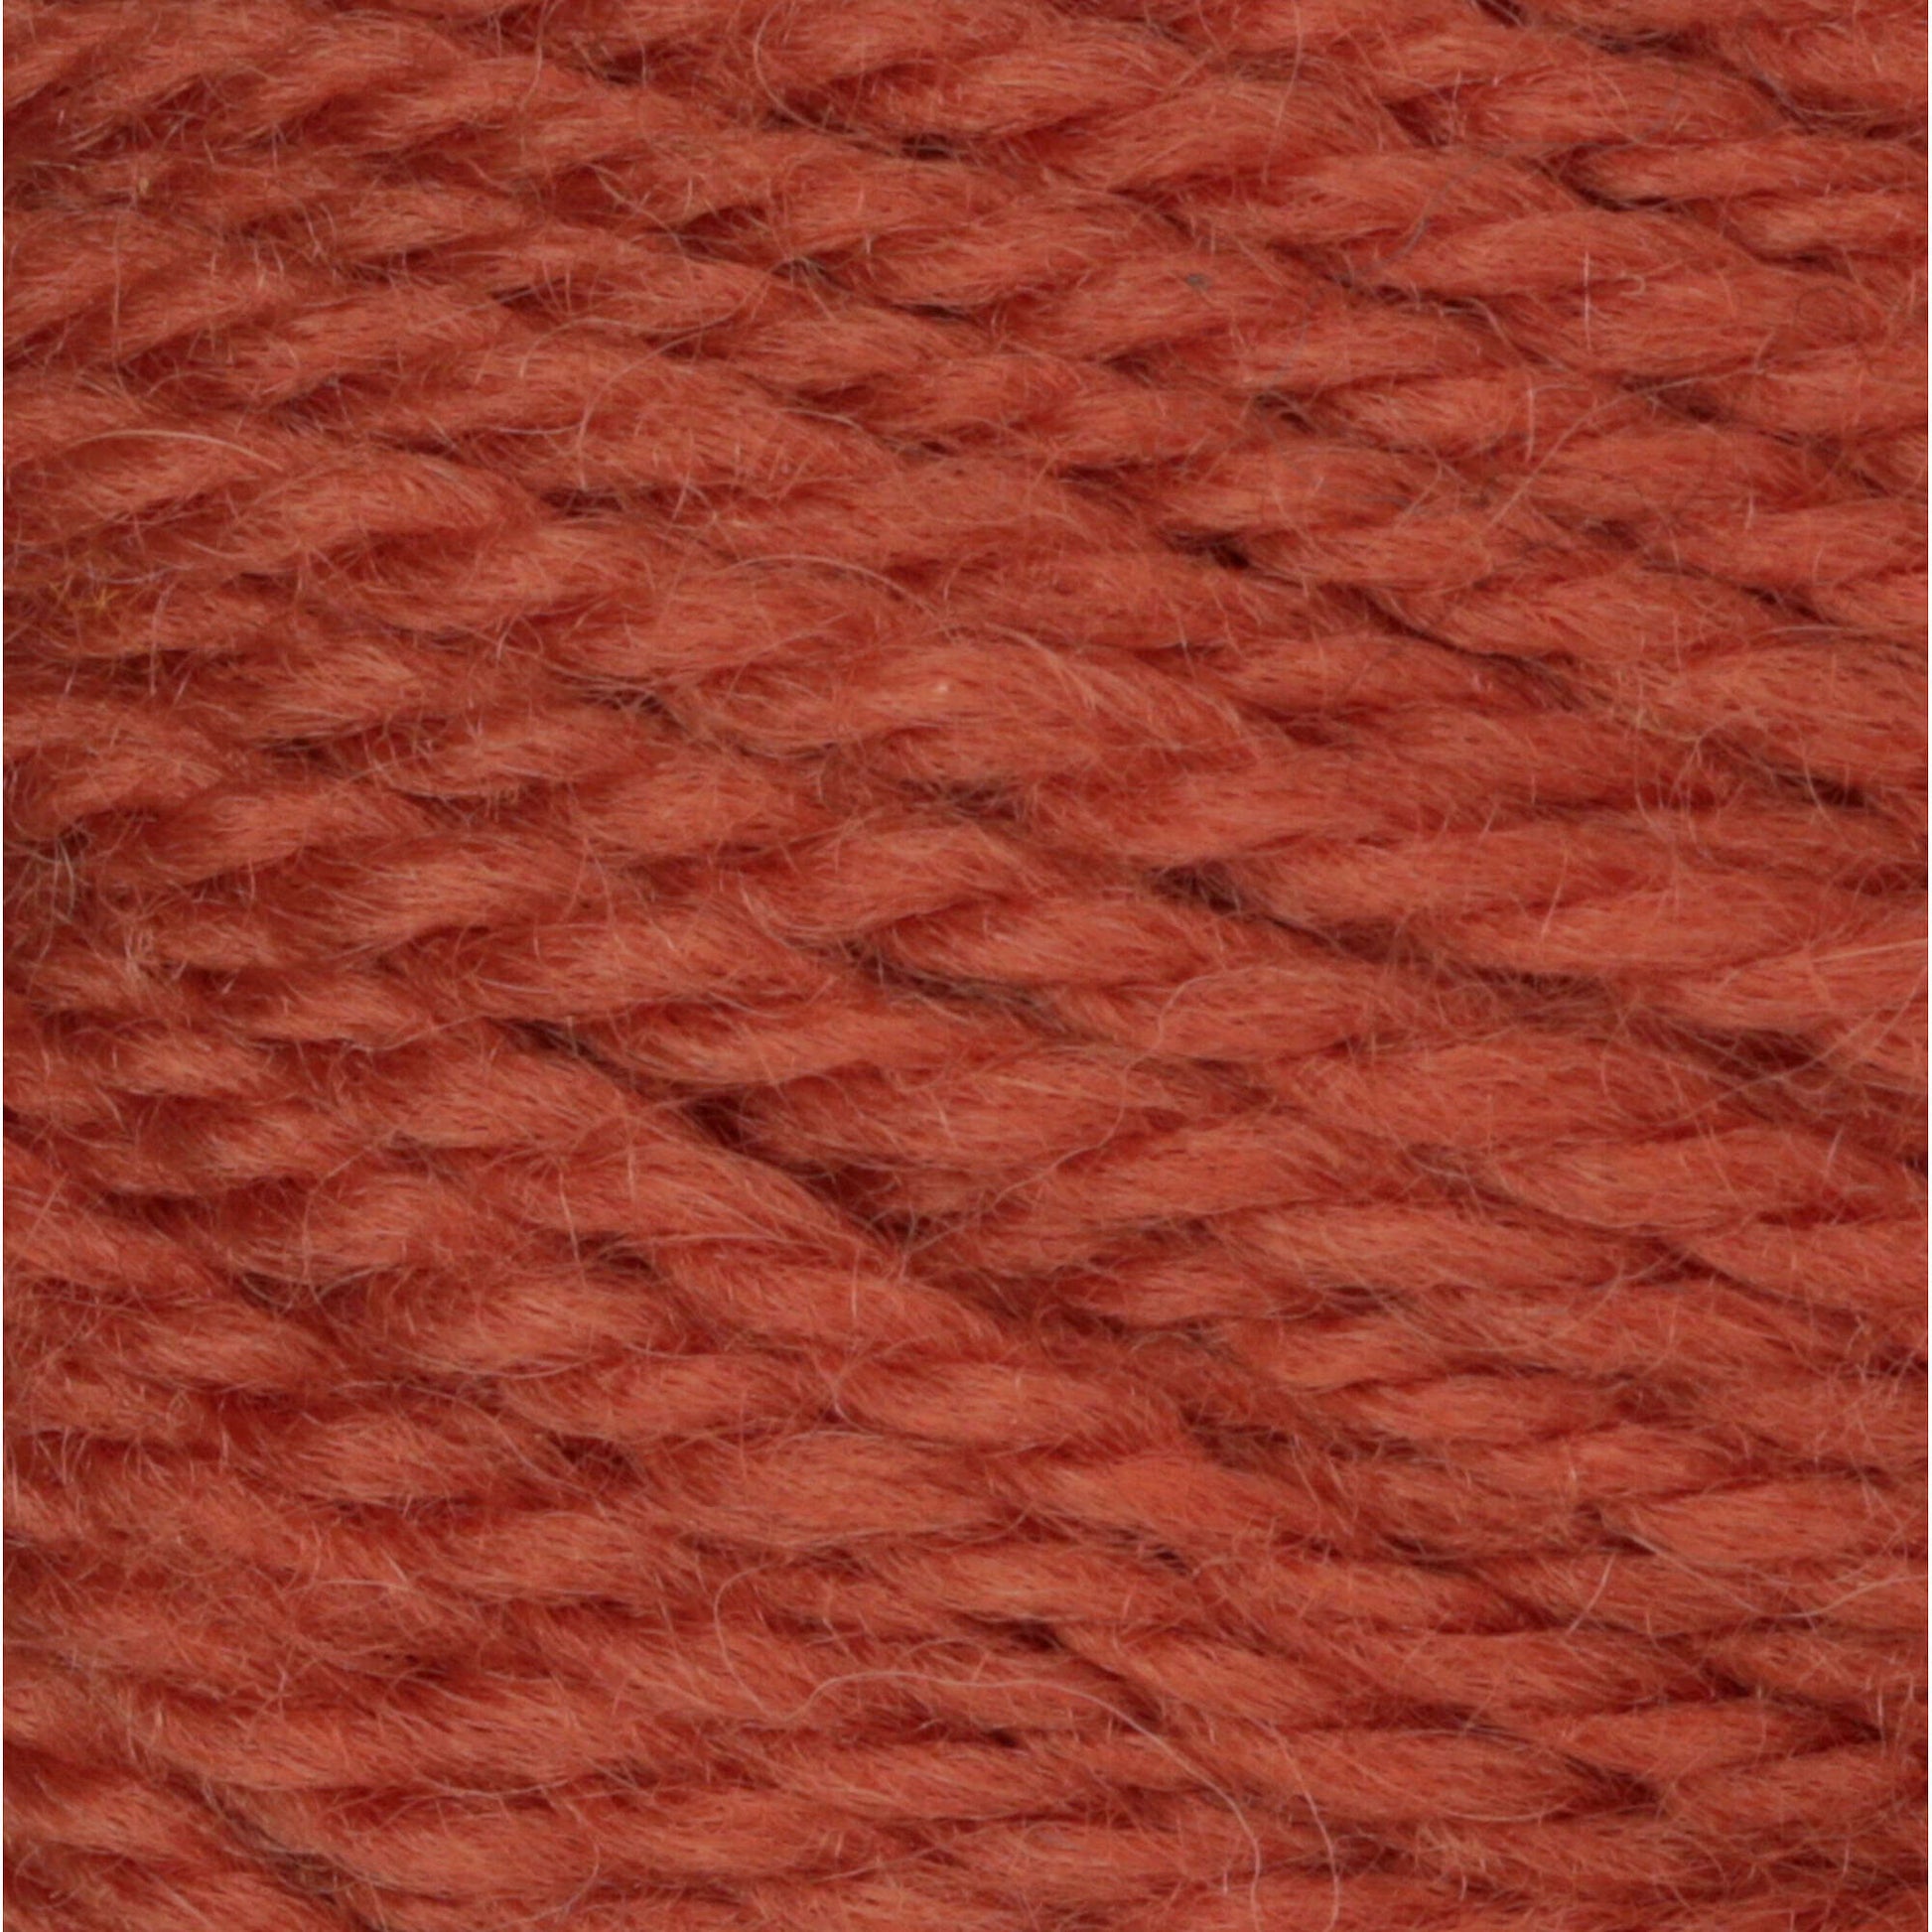 Patons Classic Wool Worsted Yarn - Discontinued Shades Gingerbread